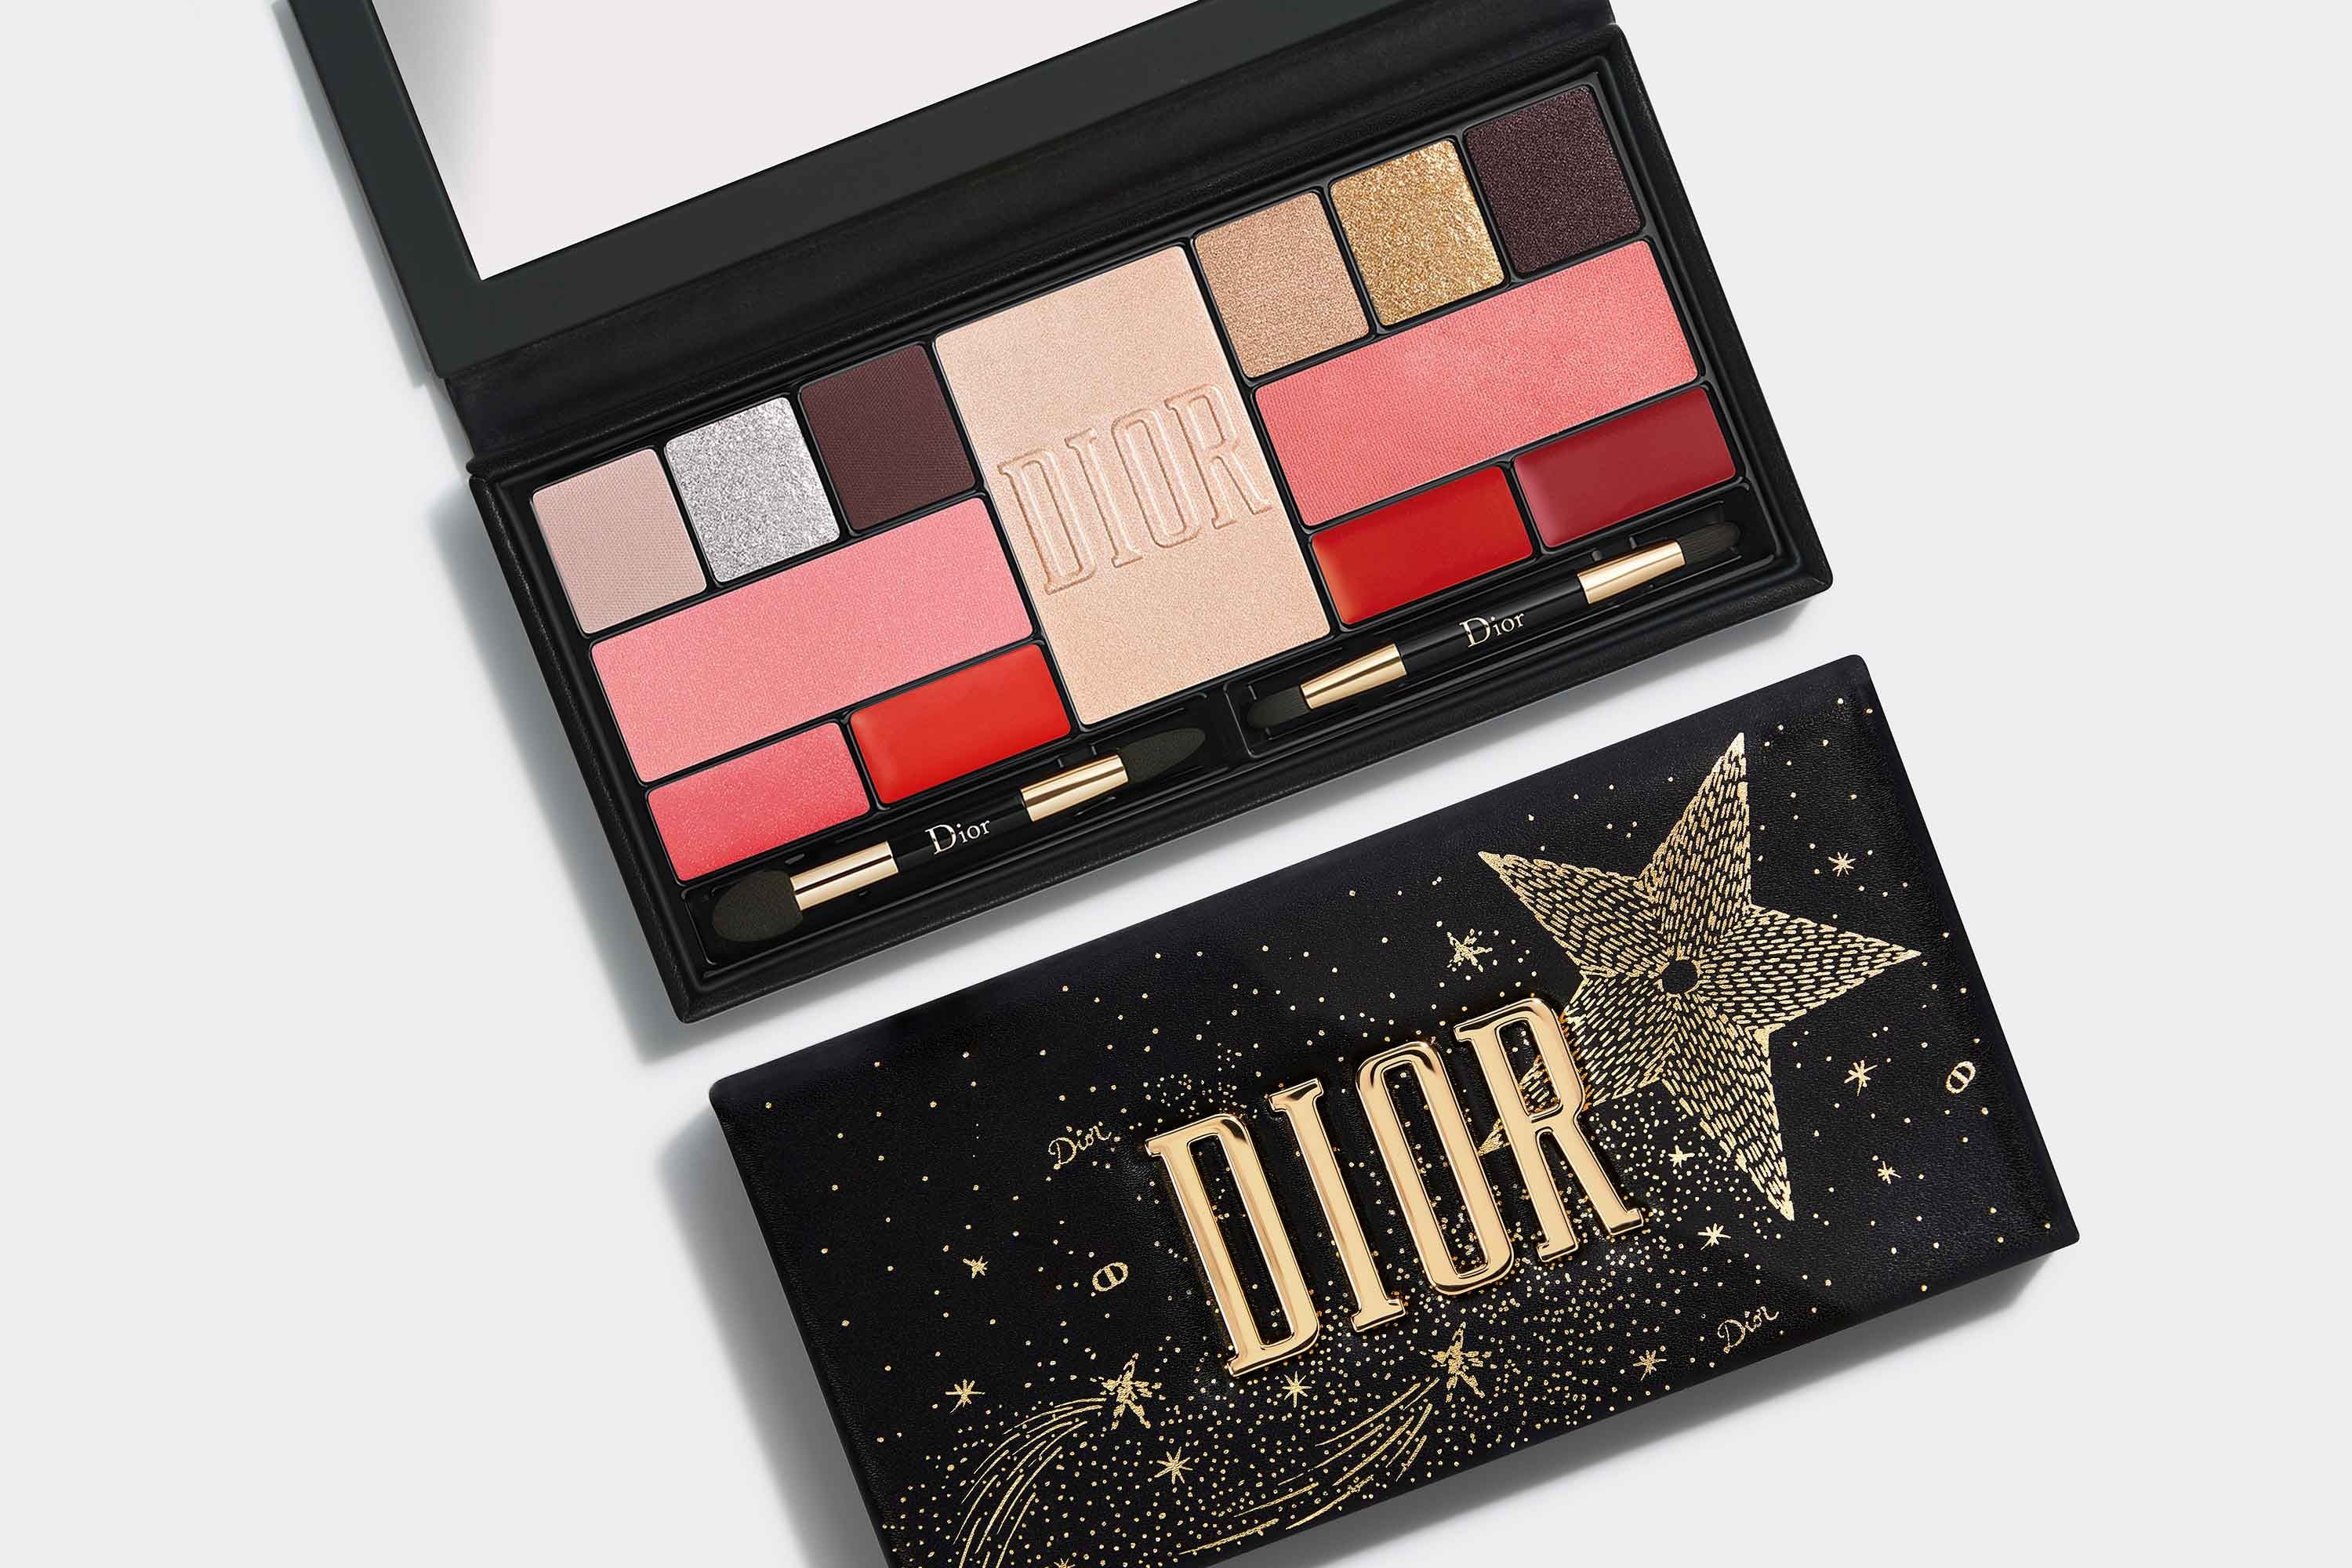 dior holiday couture